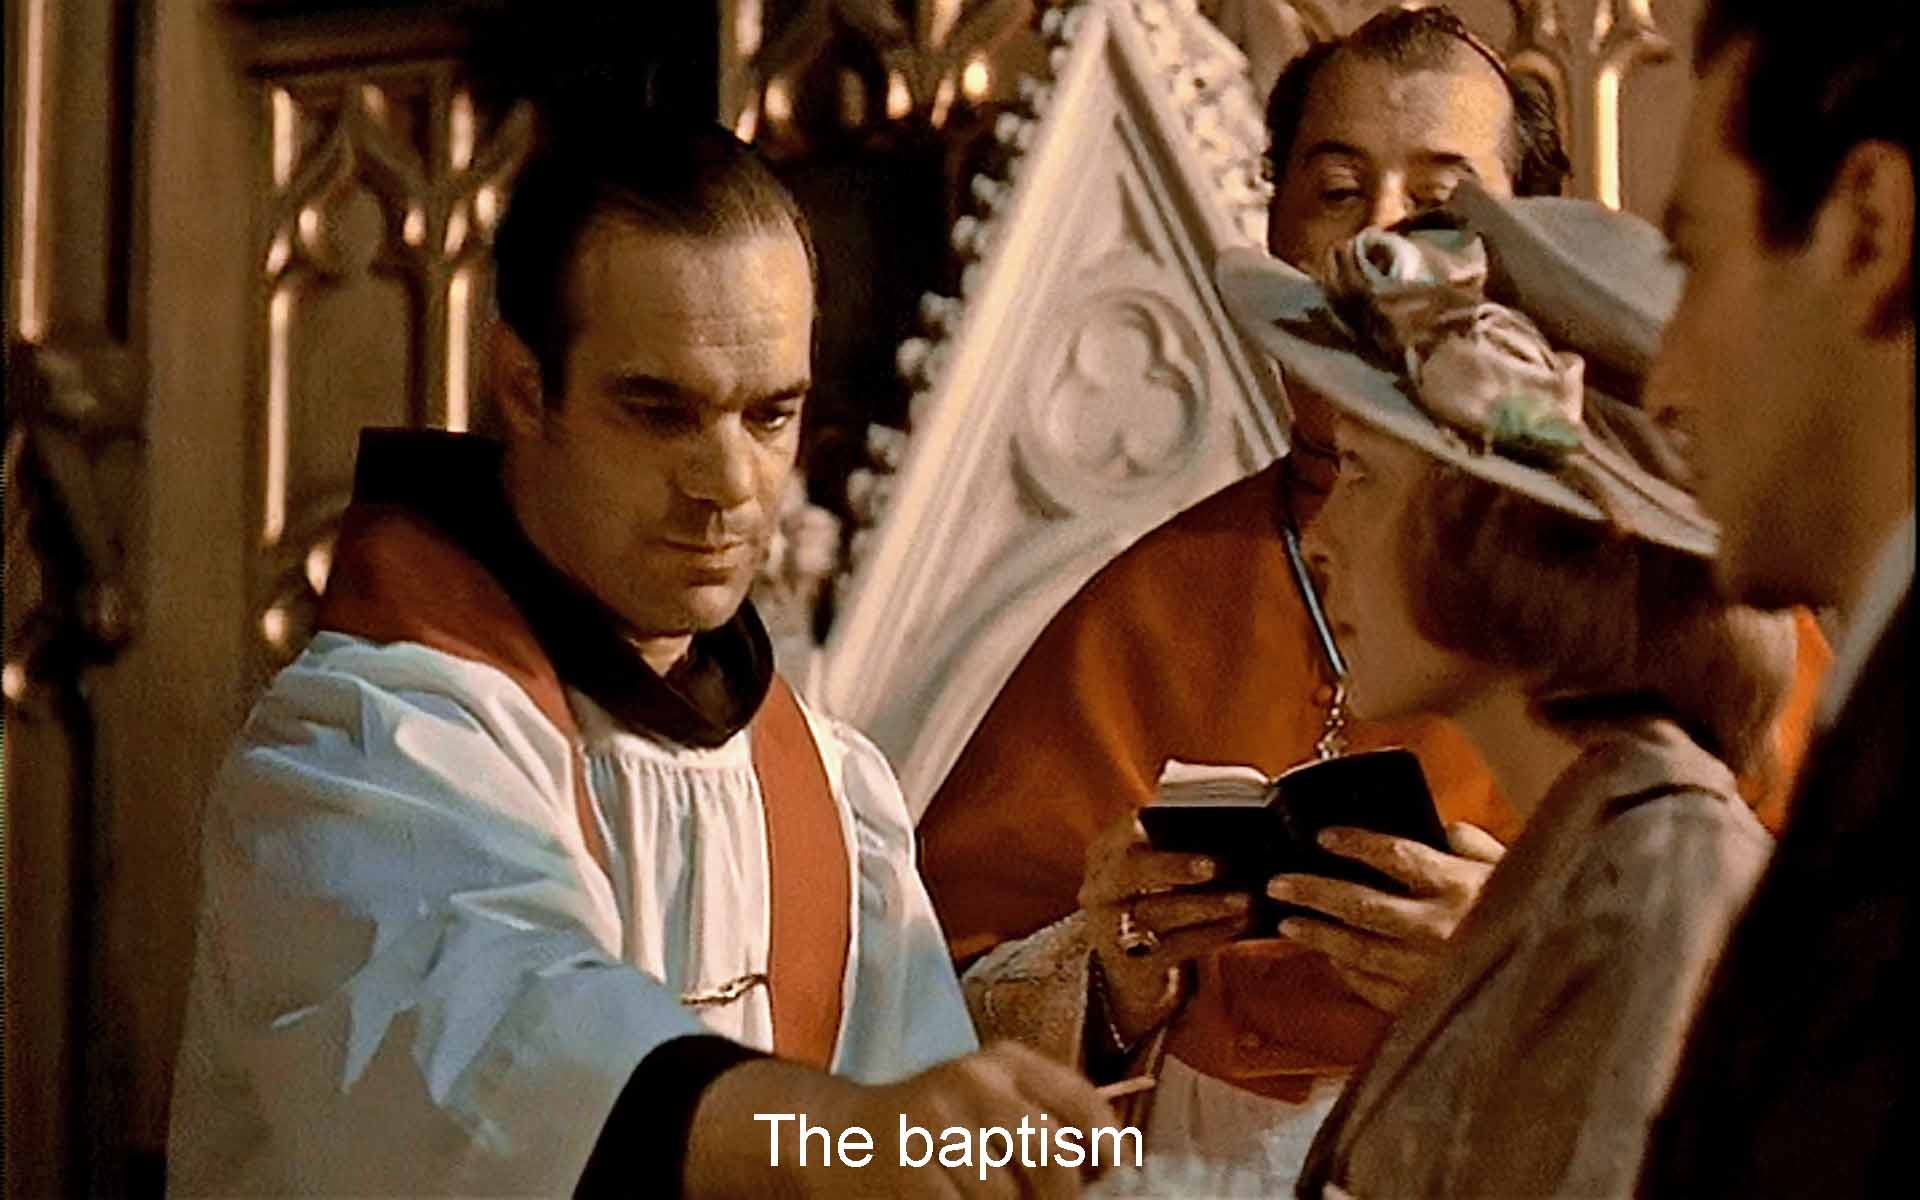 The baptism